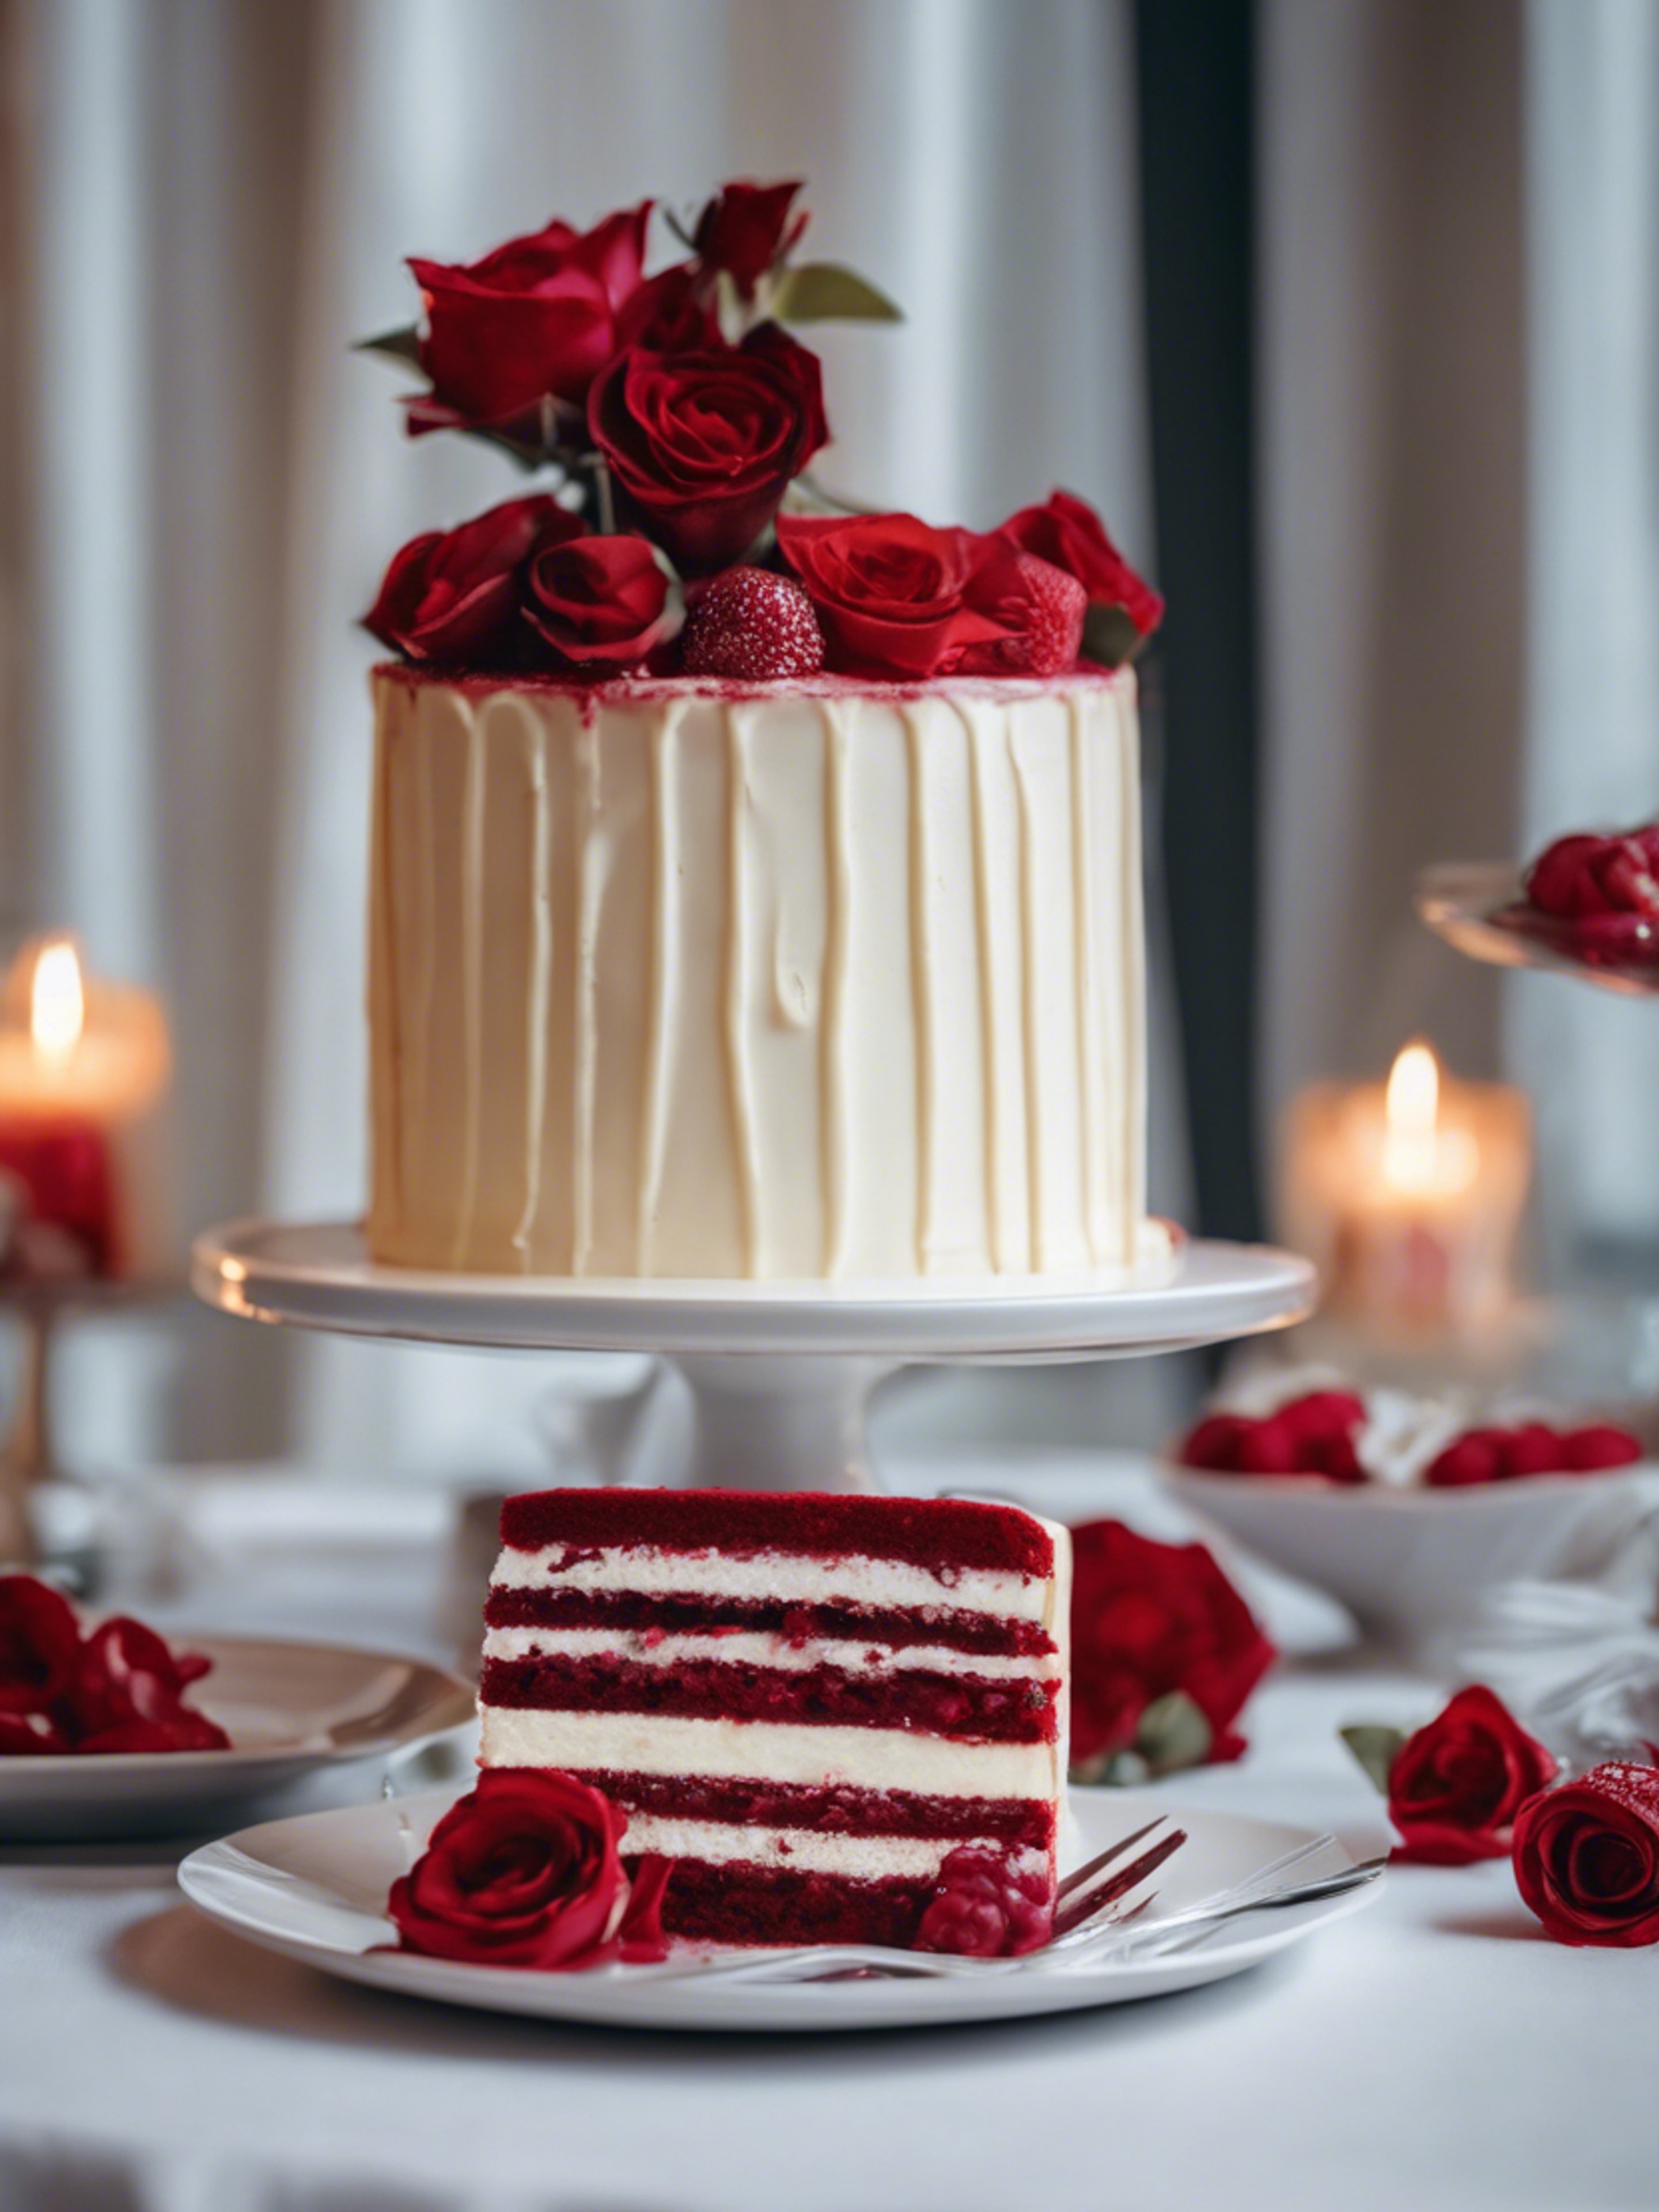 A scrumptious red velvet and white cream layered cake on a dessert table. Tapeta[9c378ca78b014f2daafb]